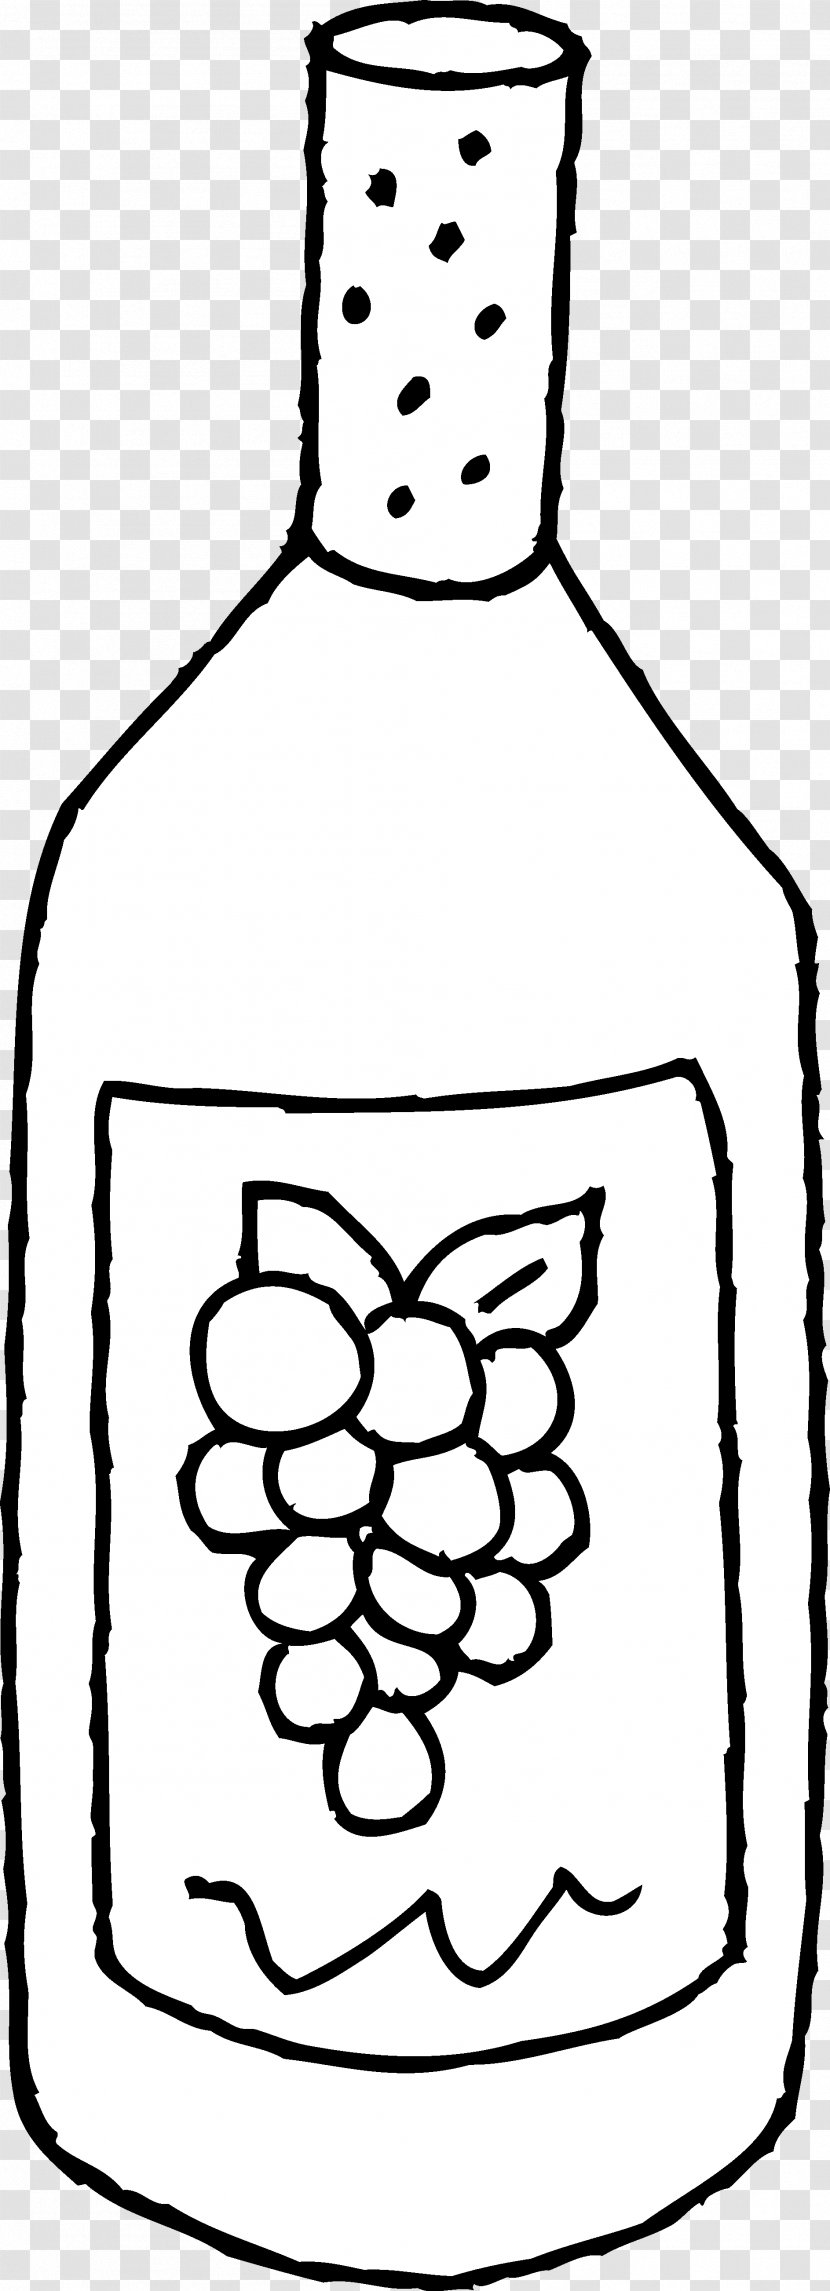 Wine Fizzy Drinks Coloring Book Bottle Clip Art - Drawing - Pictures Of Bottles Transparent PNG